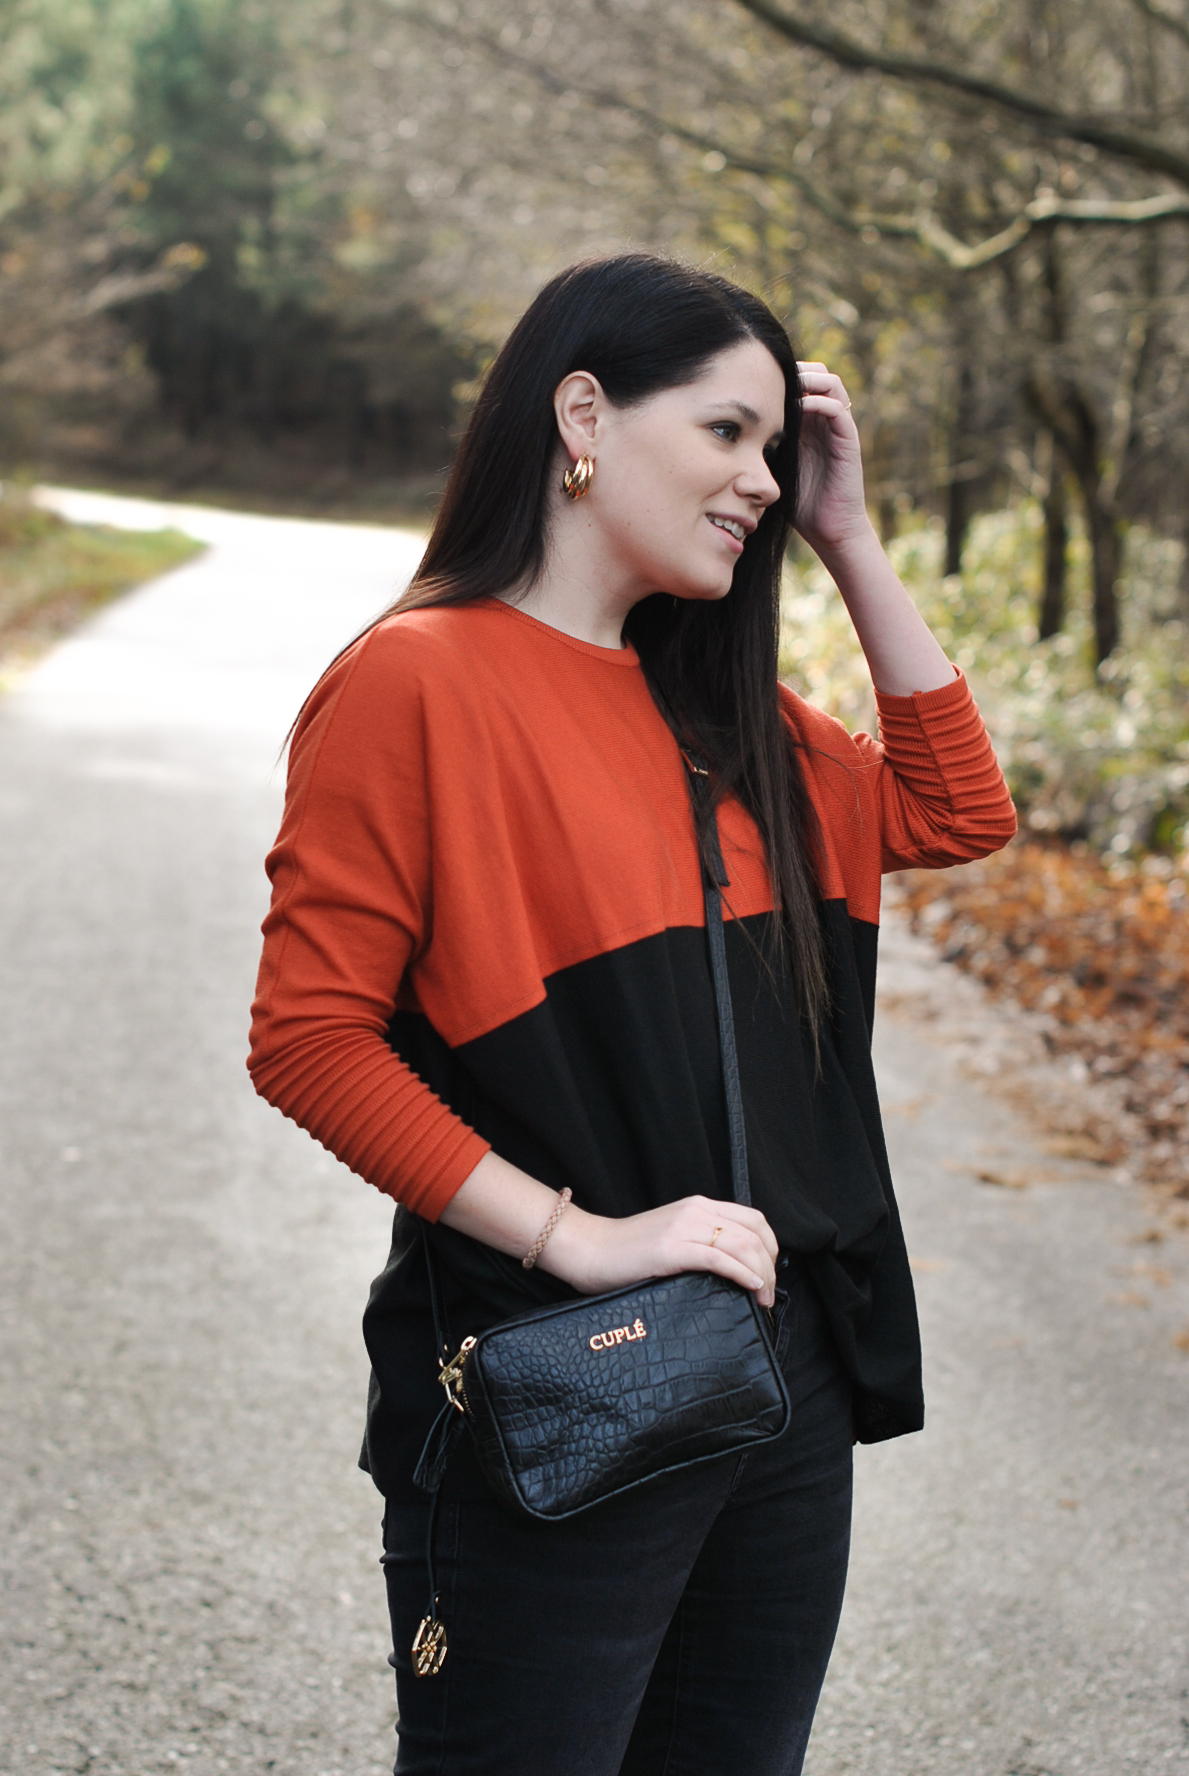 OF-20191220-OUTFIT-CUPLE-BOLSO-JERSEY-PENDIENTES-007